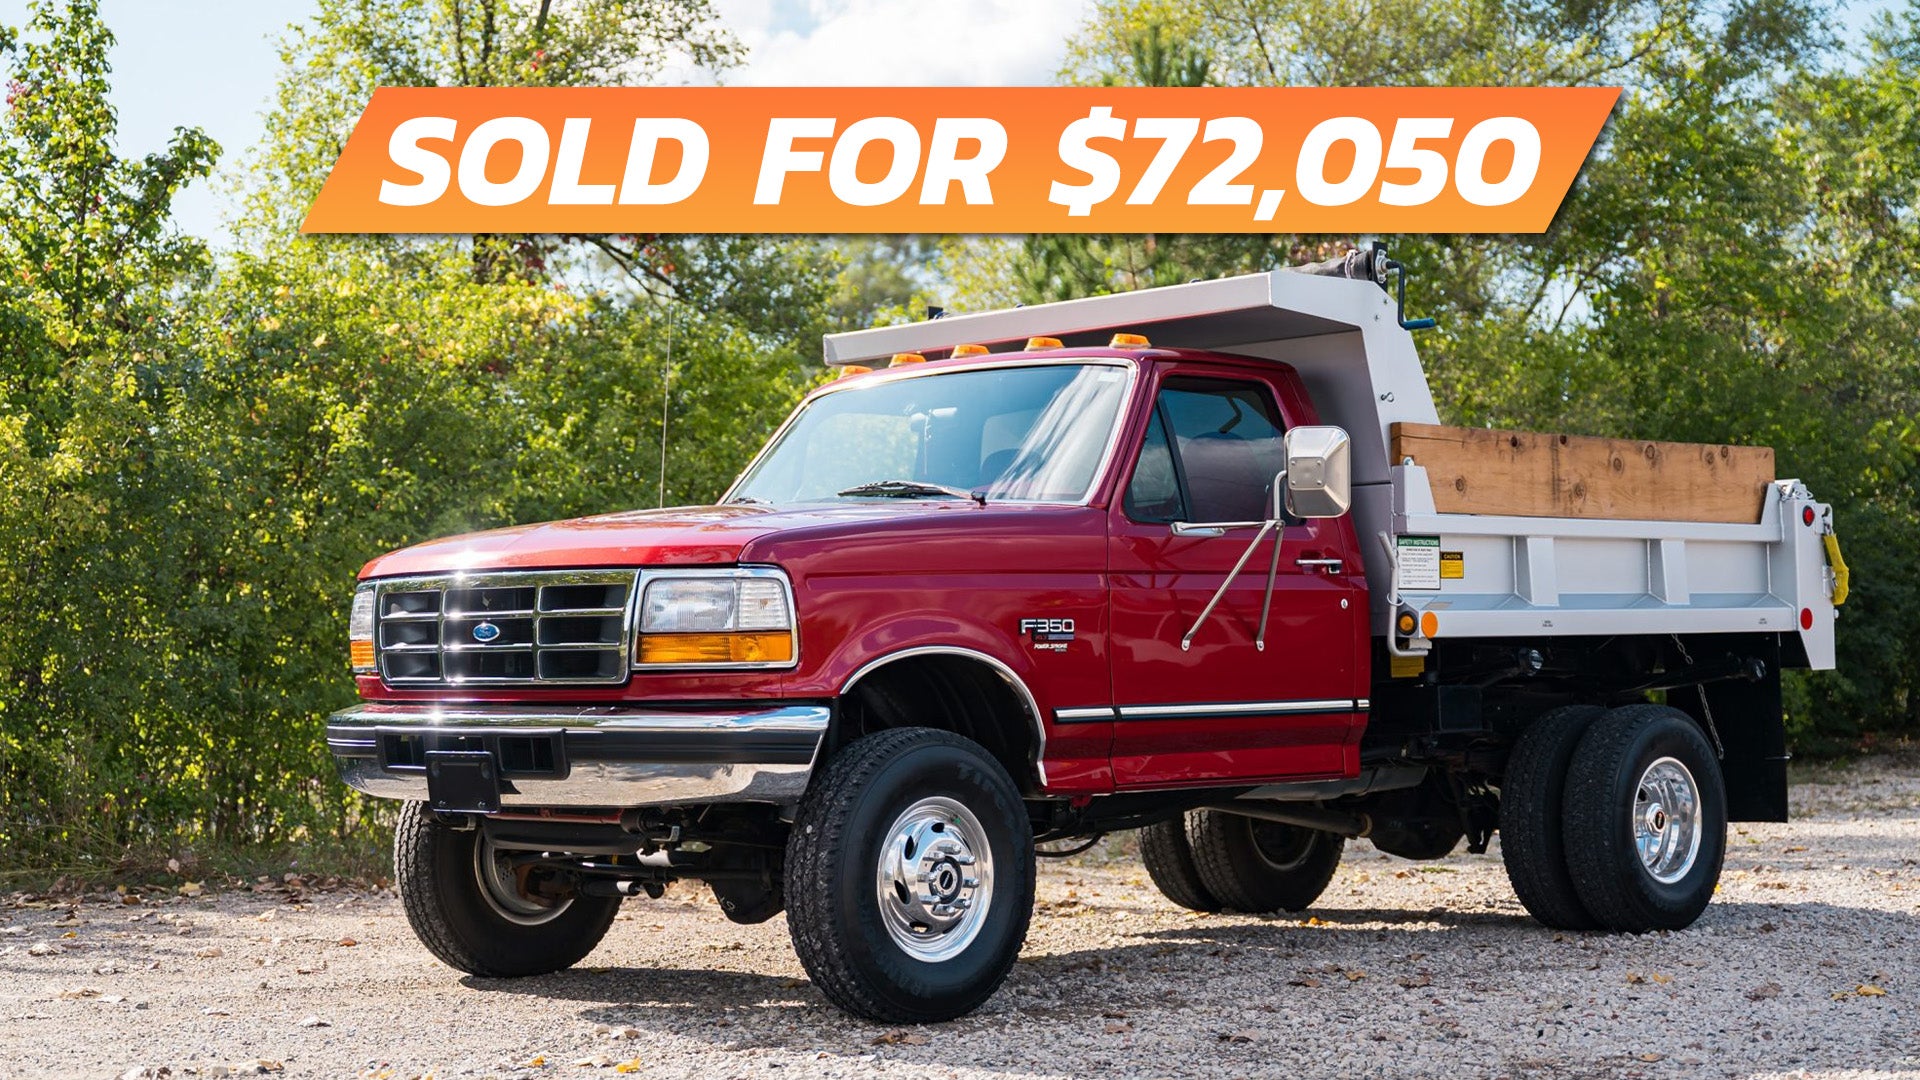 Here’s Why This 1997 Ford Dump Truck Is Almost a Steal at $72K – The Drive